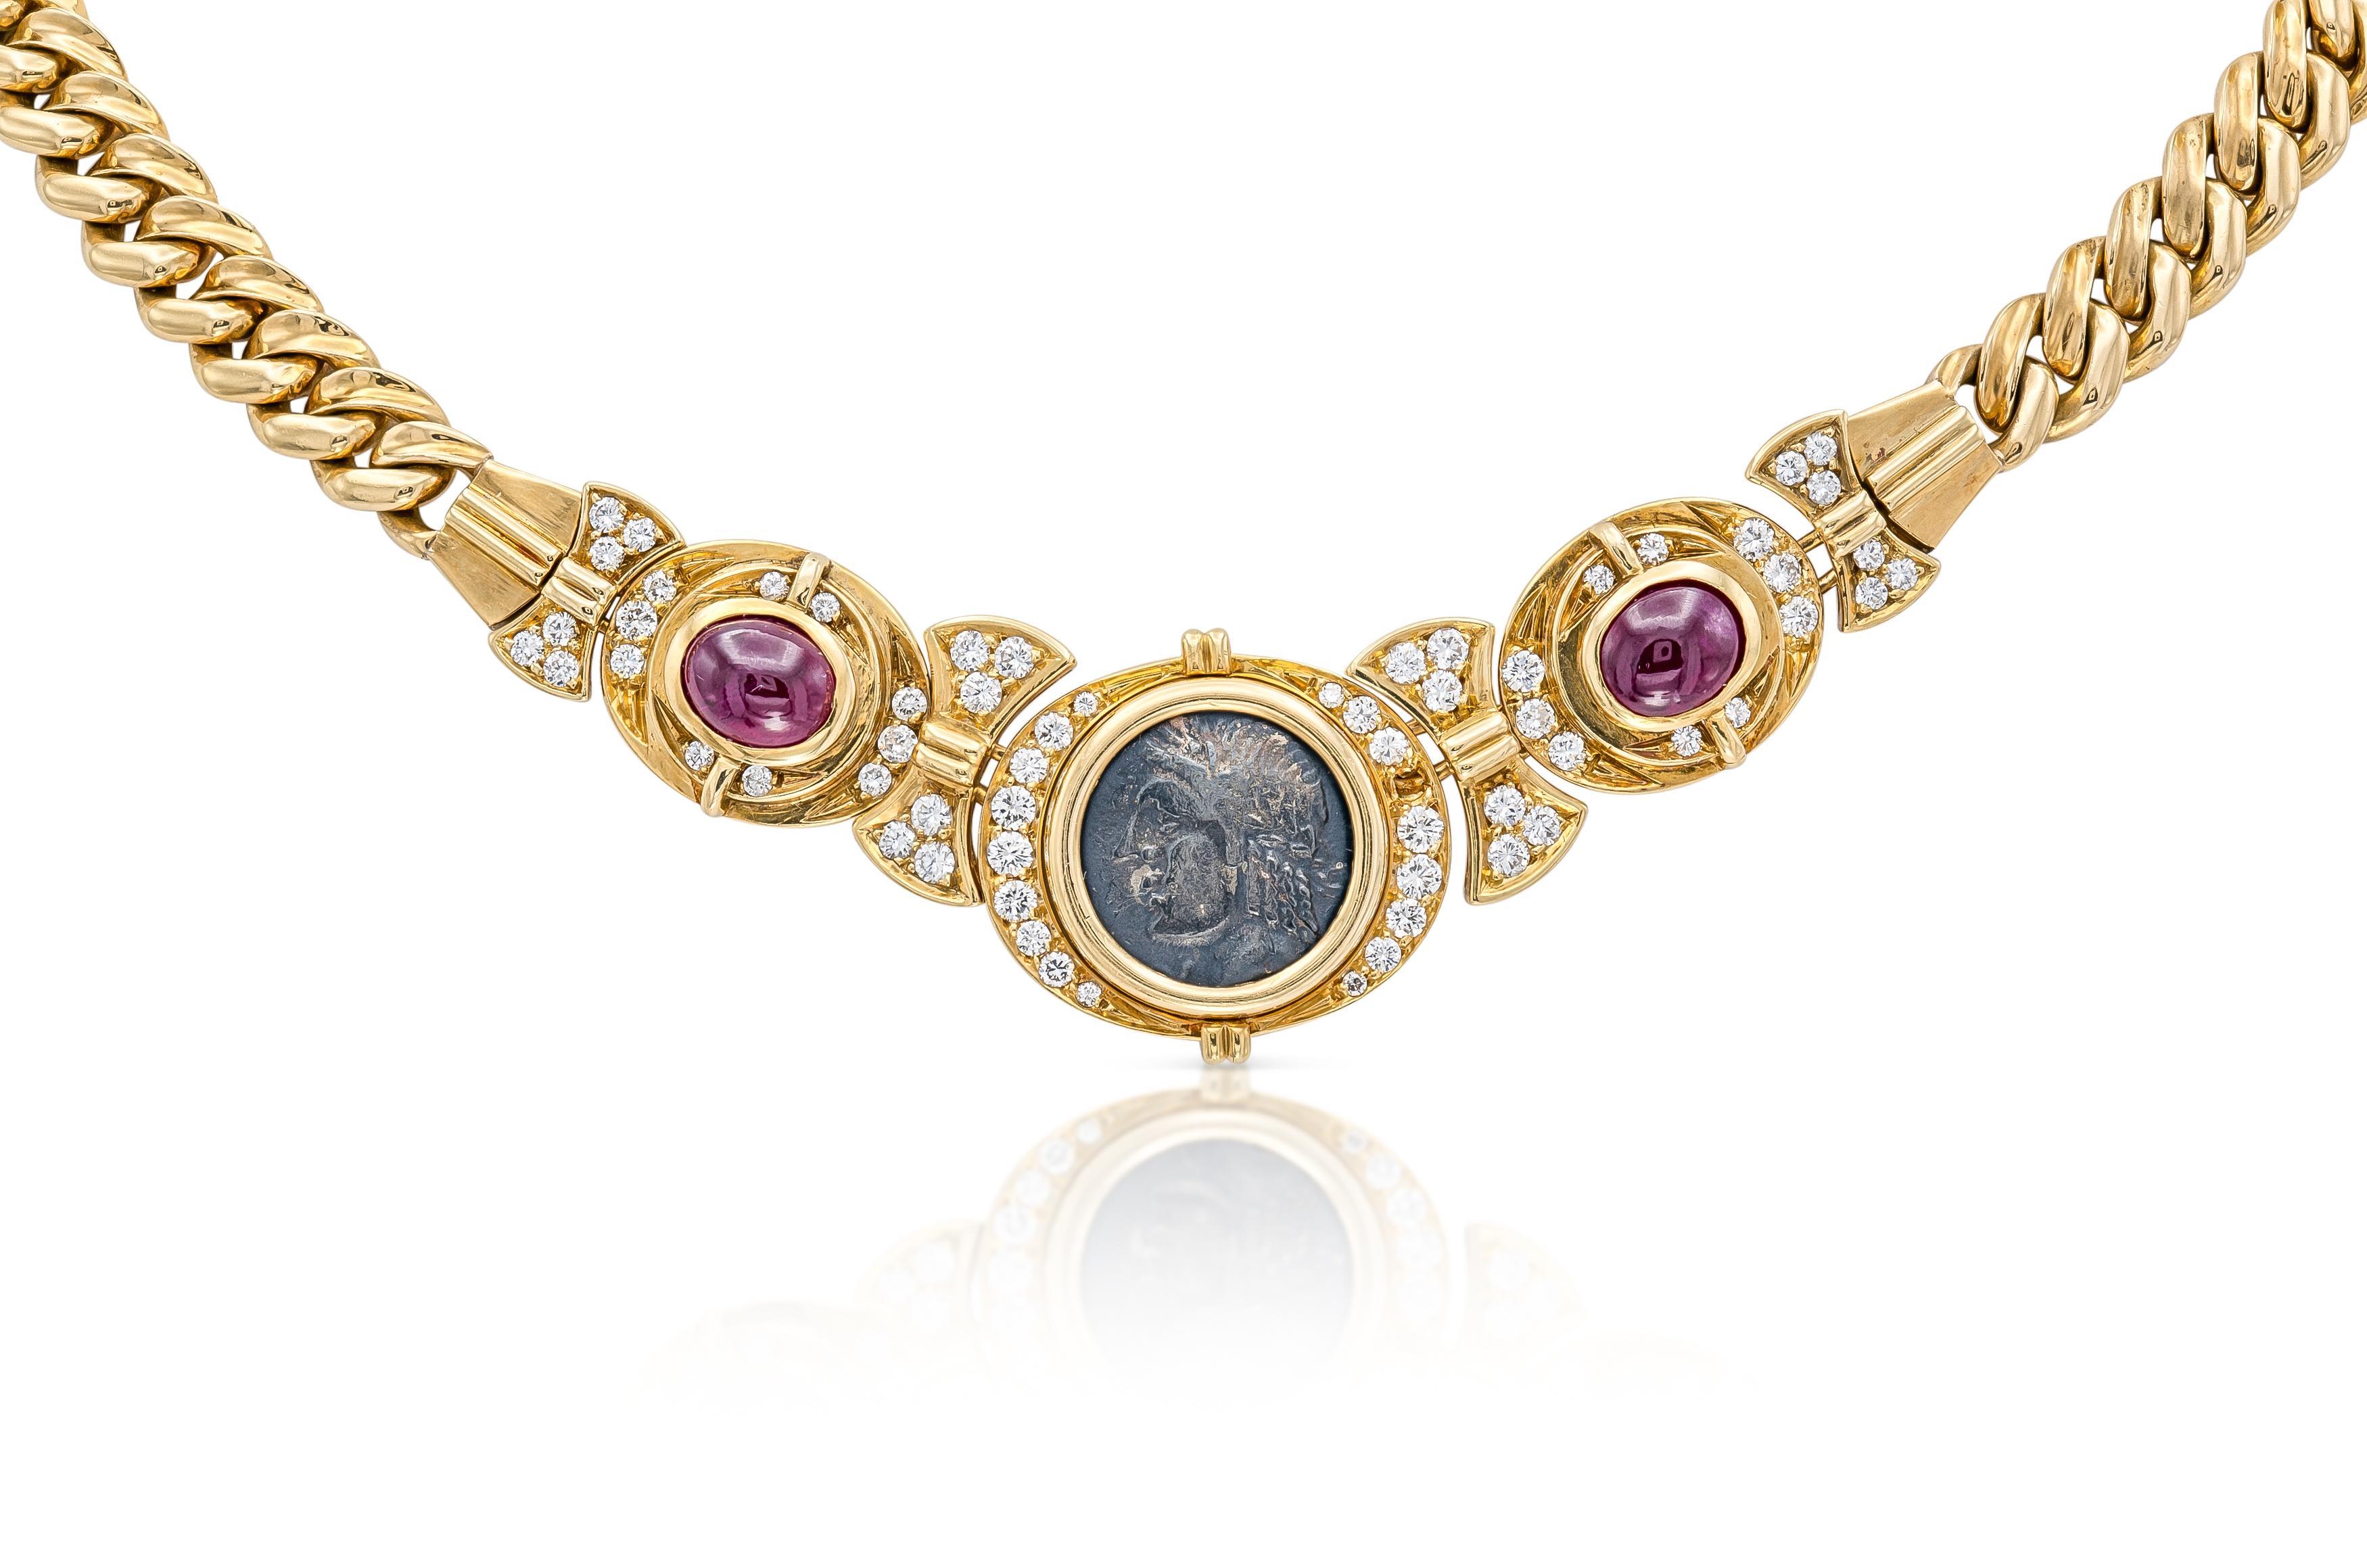 Finely crafted in 18k yellow gold with an ancient Roman coin, two Cabochon Rubies, and Round Brilliant cut Diamonds.
Signed by Bvlgari, from their Monete Collection
Circa 1970s
16 1/2 inches long